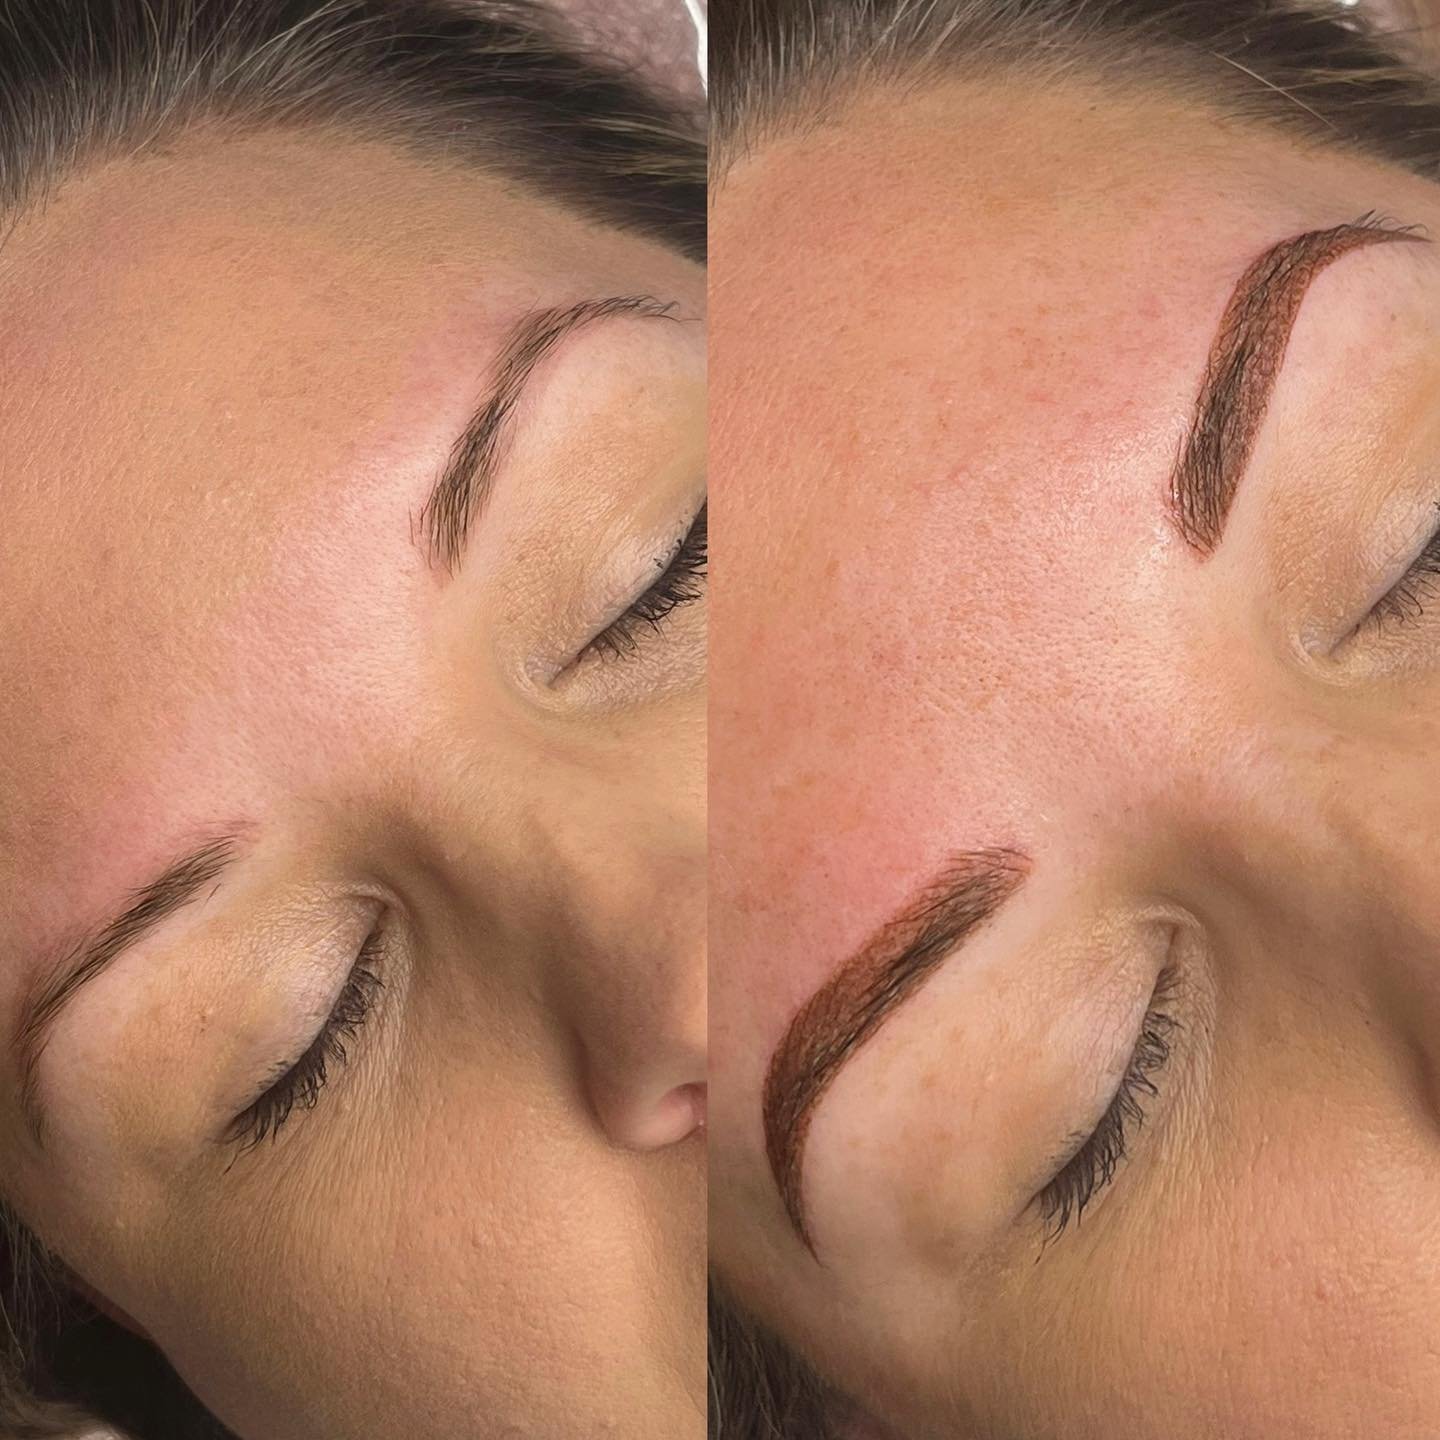 ✨Fresh Combo Brows ✨

&mdash;&mdash;&mdash;&mdash;&mdash;&mdash;&mdash;&mdash;&mdash;&mdash;&mdash;&mdash;&mdash;&mdash;&mdash;&mdash;&mdash;&mdash;&mdash;&mdash;&mdash;
🖊Technique: Combo Brows
⚱️Pigments used: @browdaddy 
🕞Session duration: 1.5 Ho